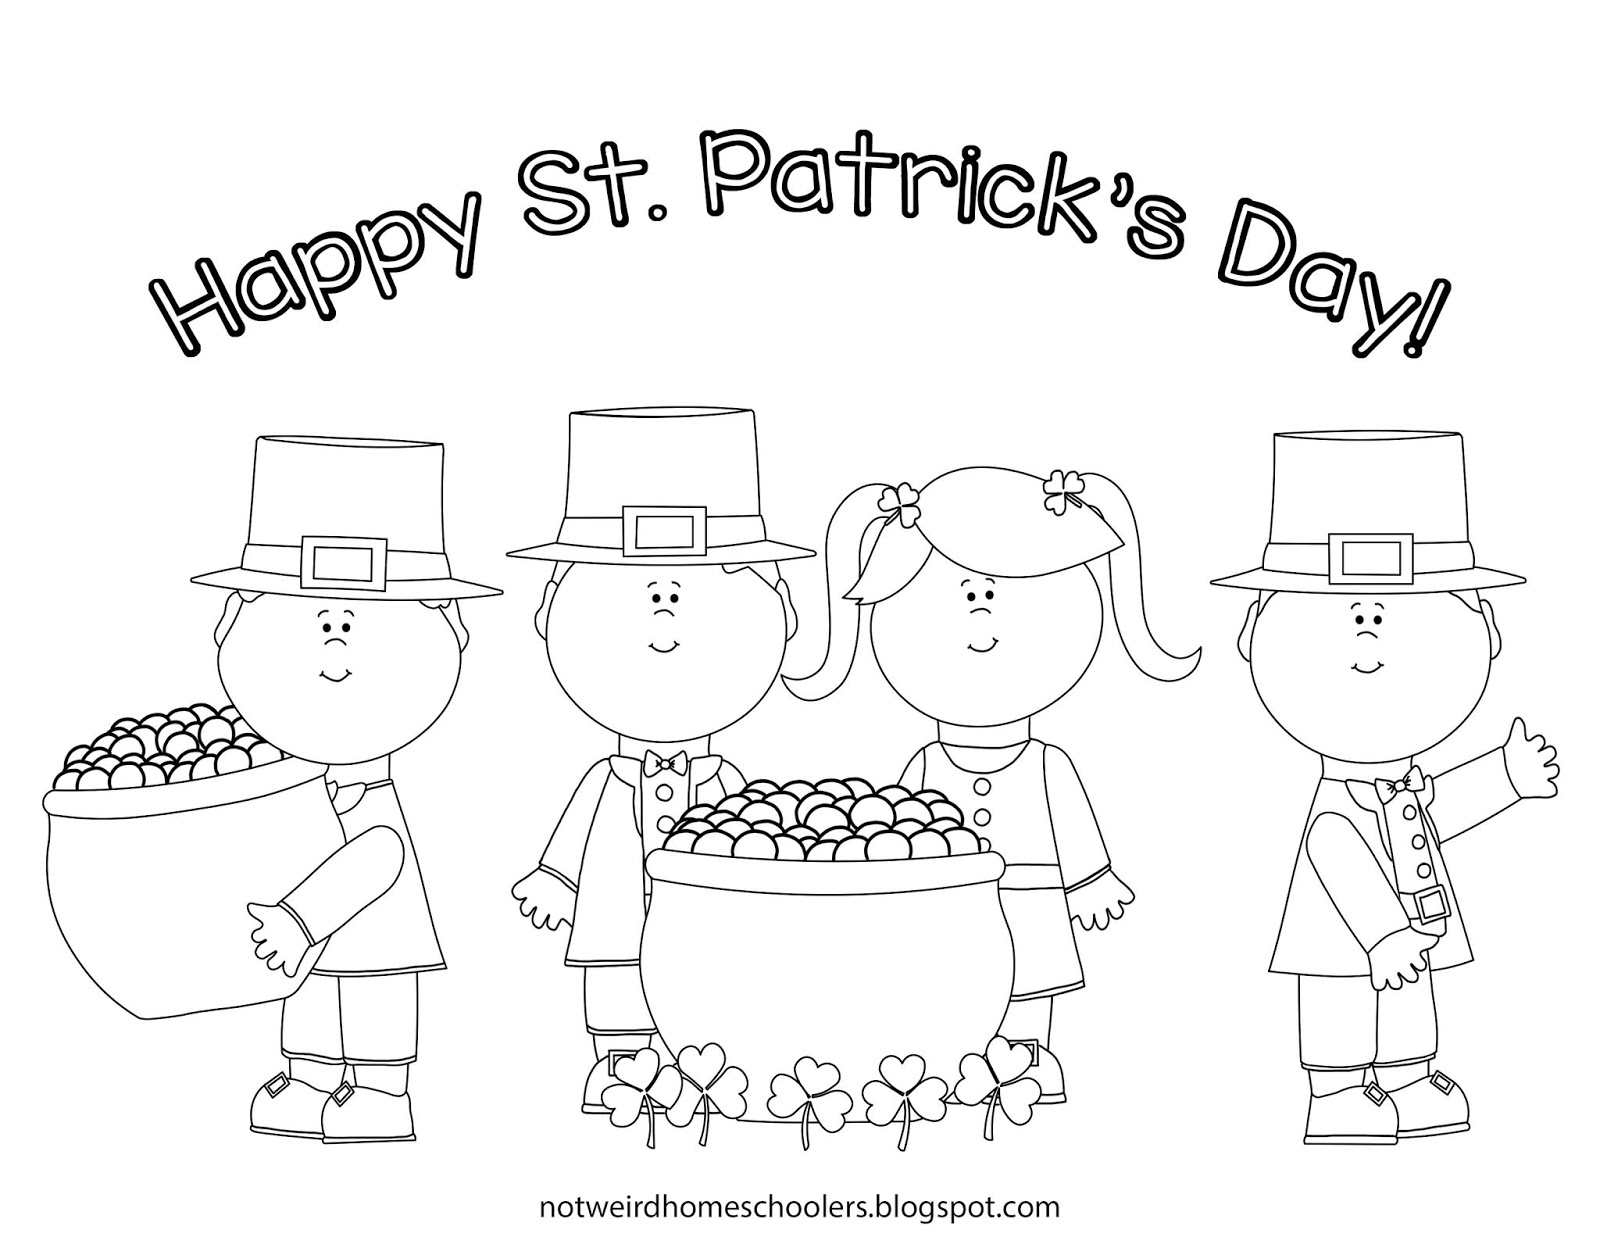 FREE HOMESCHOOLING RESOURCE!!! St. Patrick's Day Coloring Page